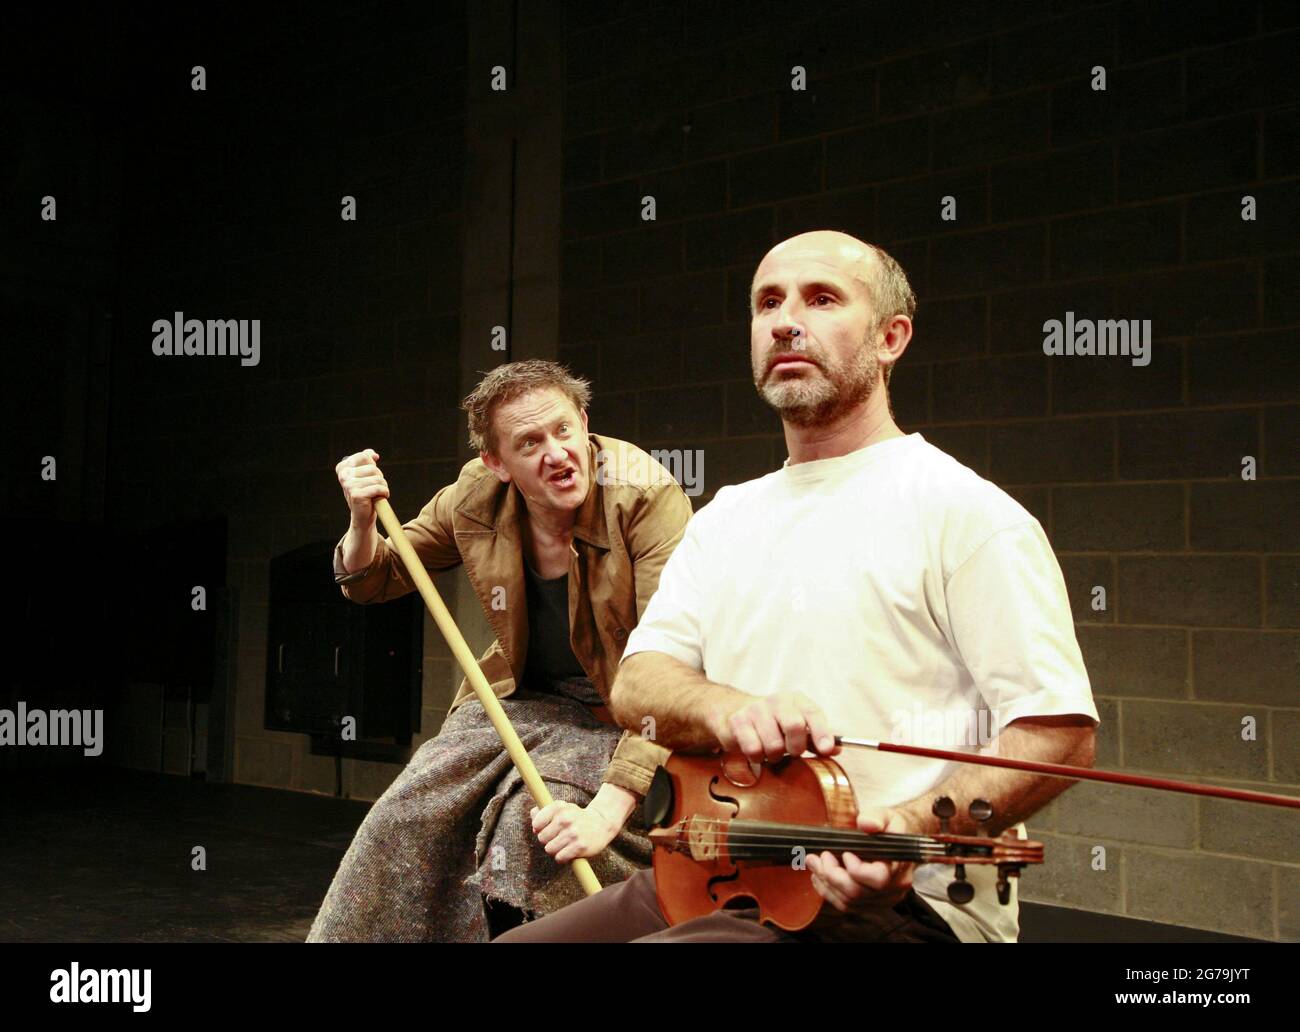 l-r: Jos Houben, Marcello Magni in ROUGH FOR THEATRE I by Samuel Beckett at The Young Vic, London SE1  20/09/2007  part of Fragments: 5 short plays  a Theatre des Bouffes du Nord / Paris & The Young Vic / London co-production  director: Peter Brook Stock Photo